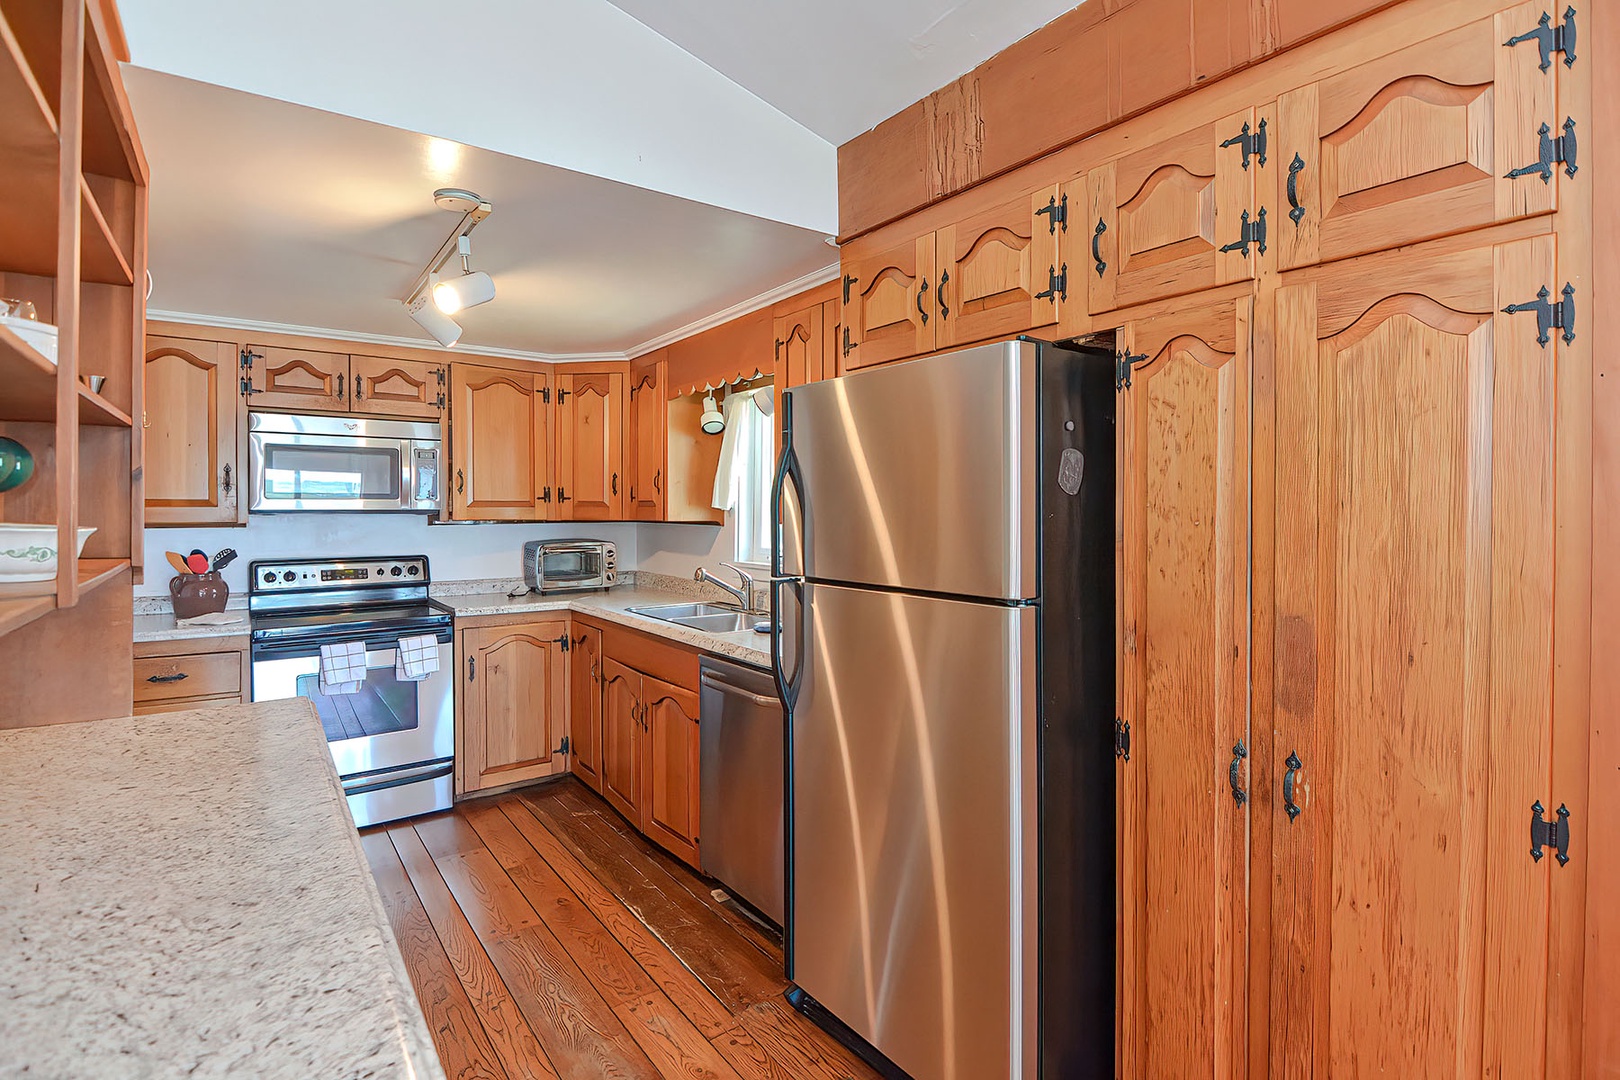 The kitchen has updated stainless appliances.